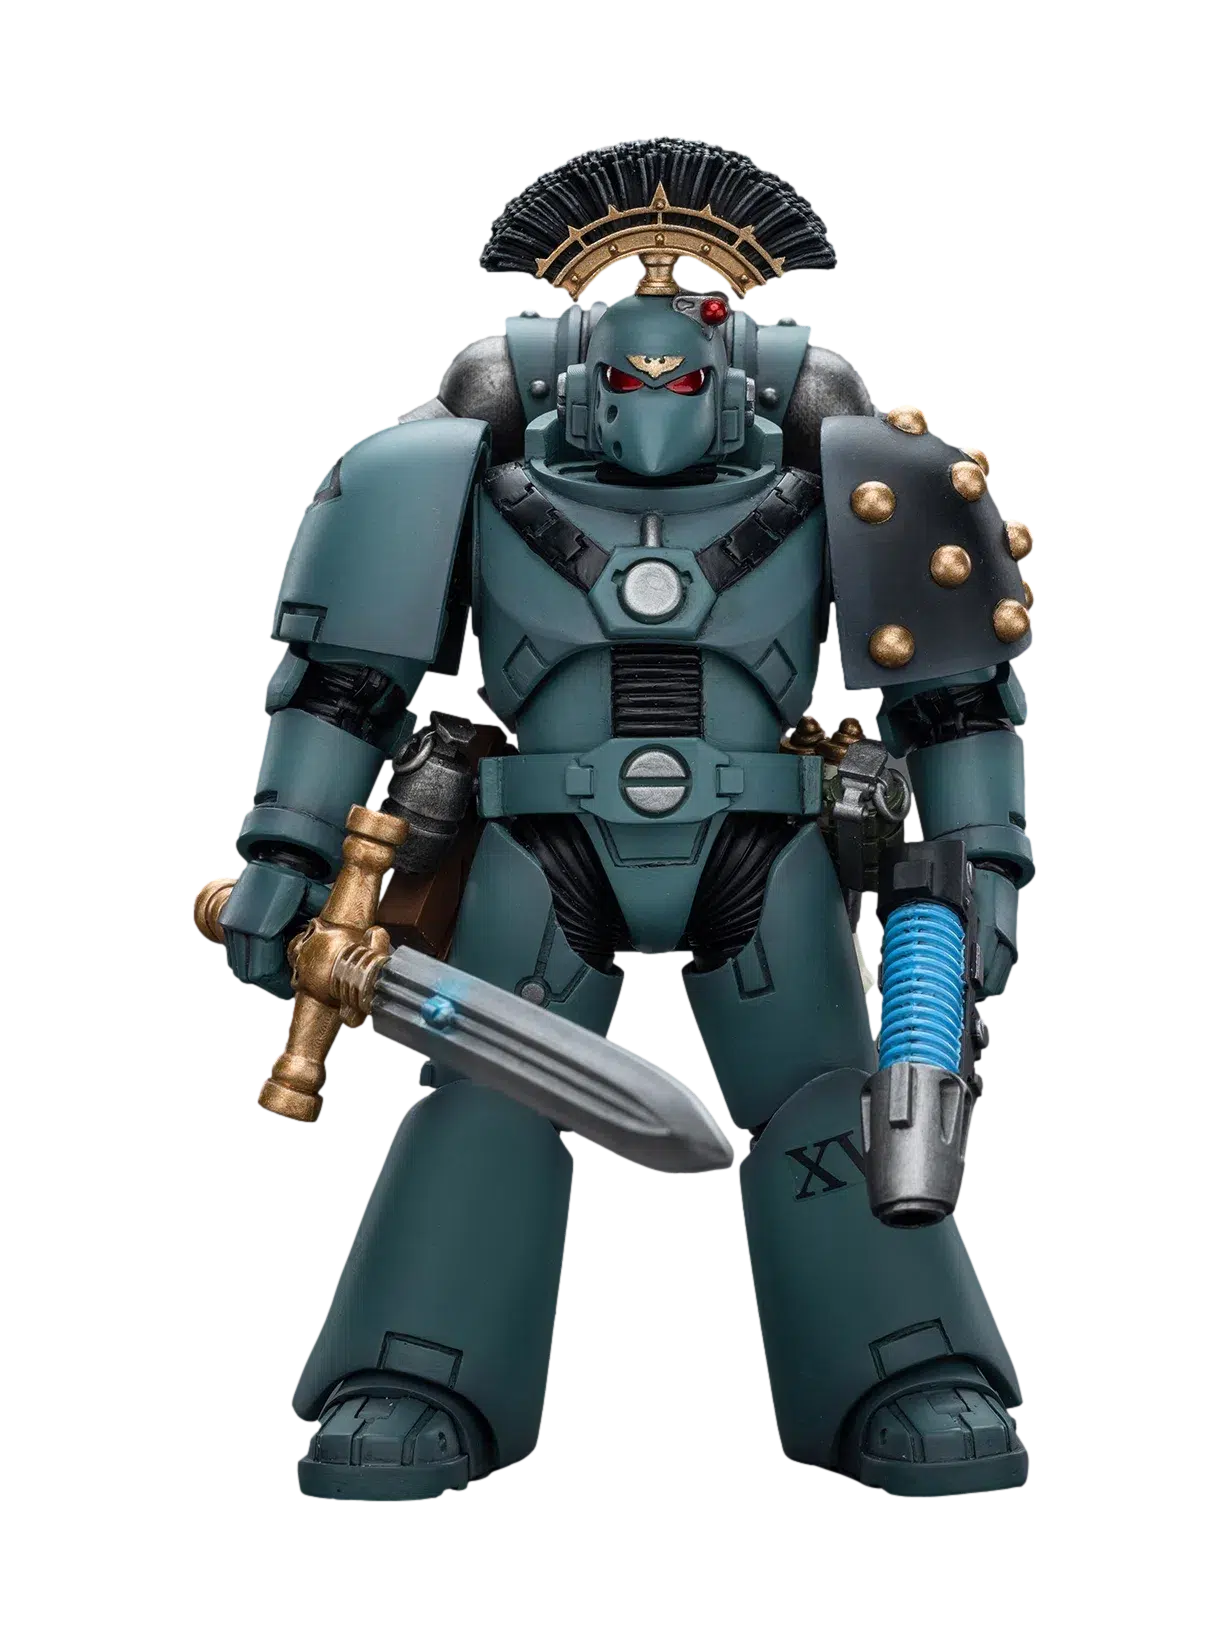 Warhammer: Horus Heresy: Sons Of Horus: MKVI Tactical Squad Sergeant with Power Sword: Joy Toy